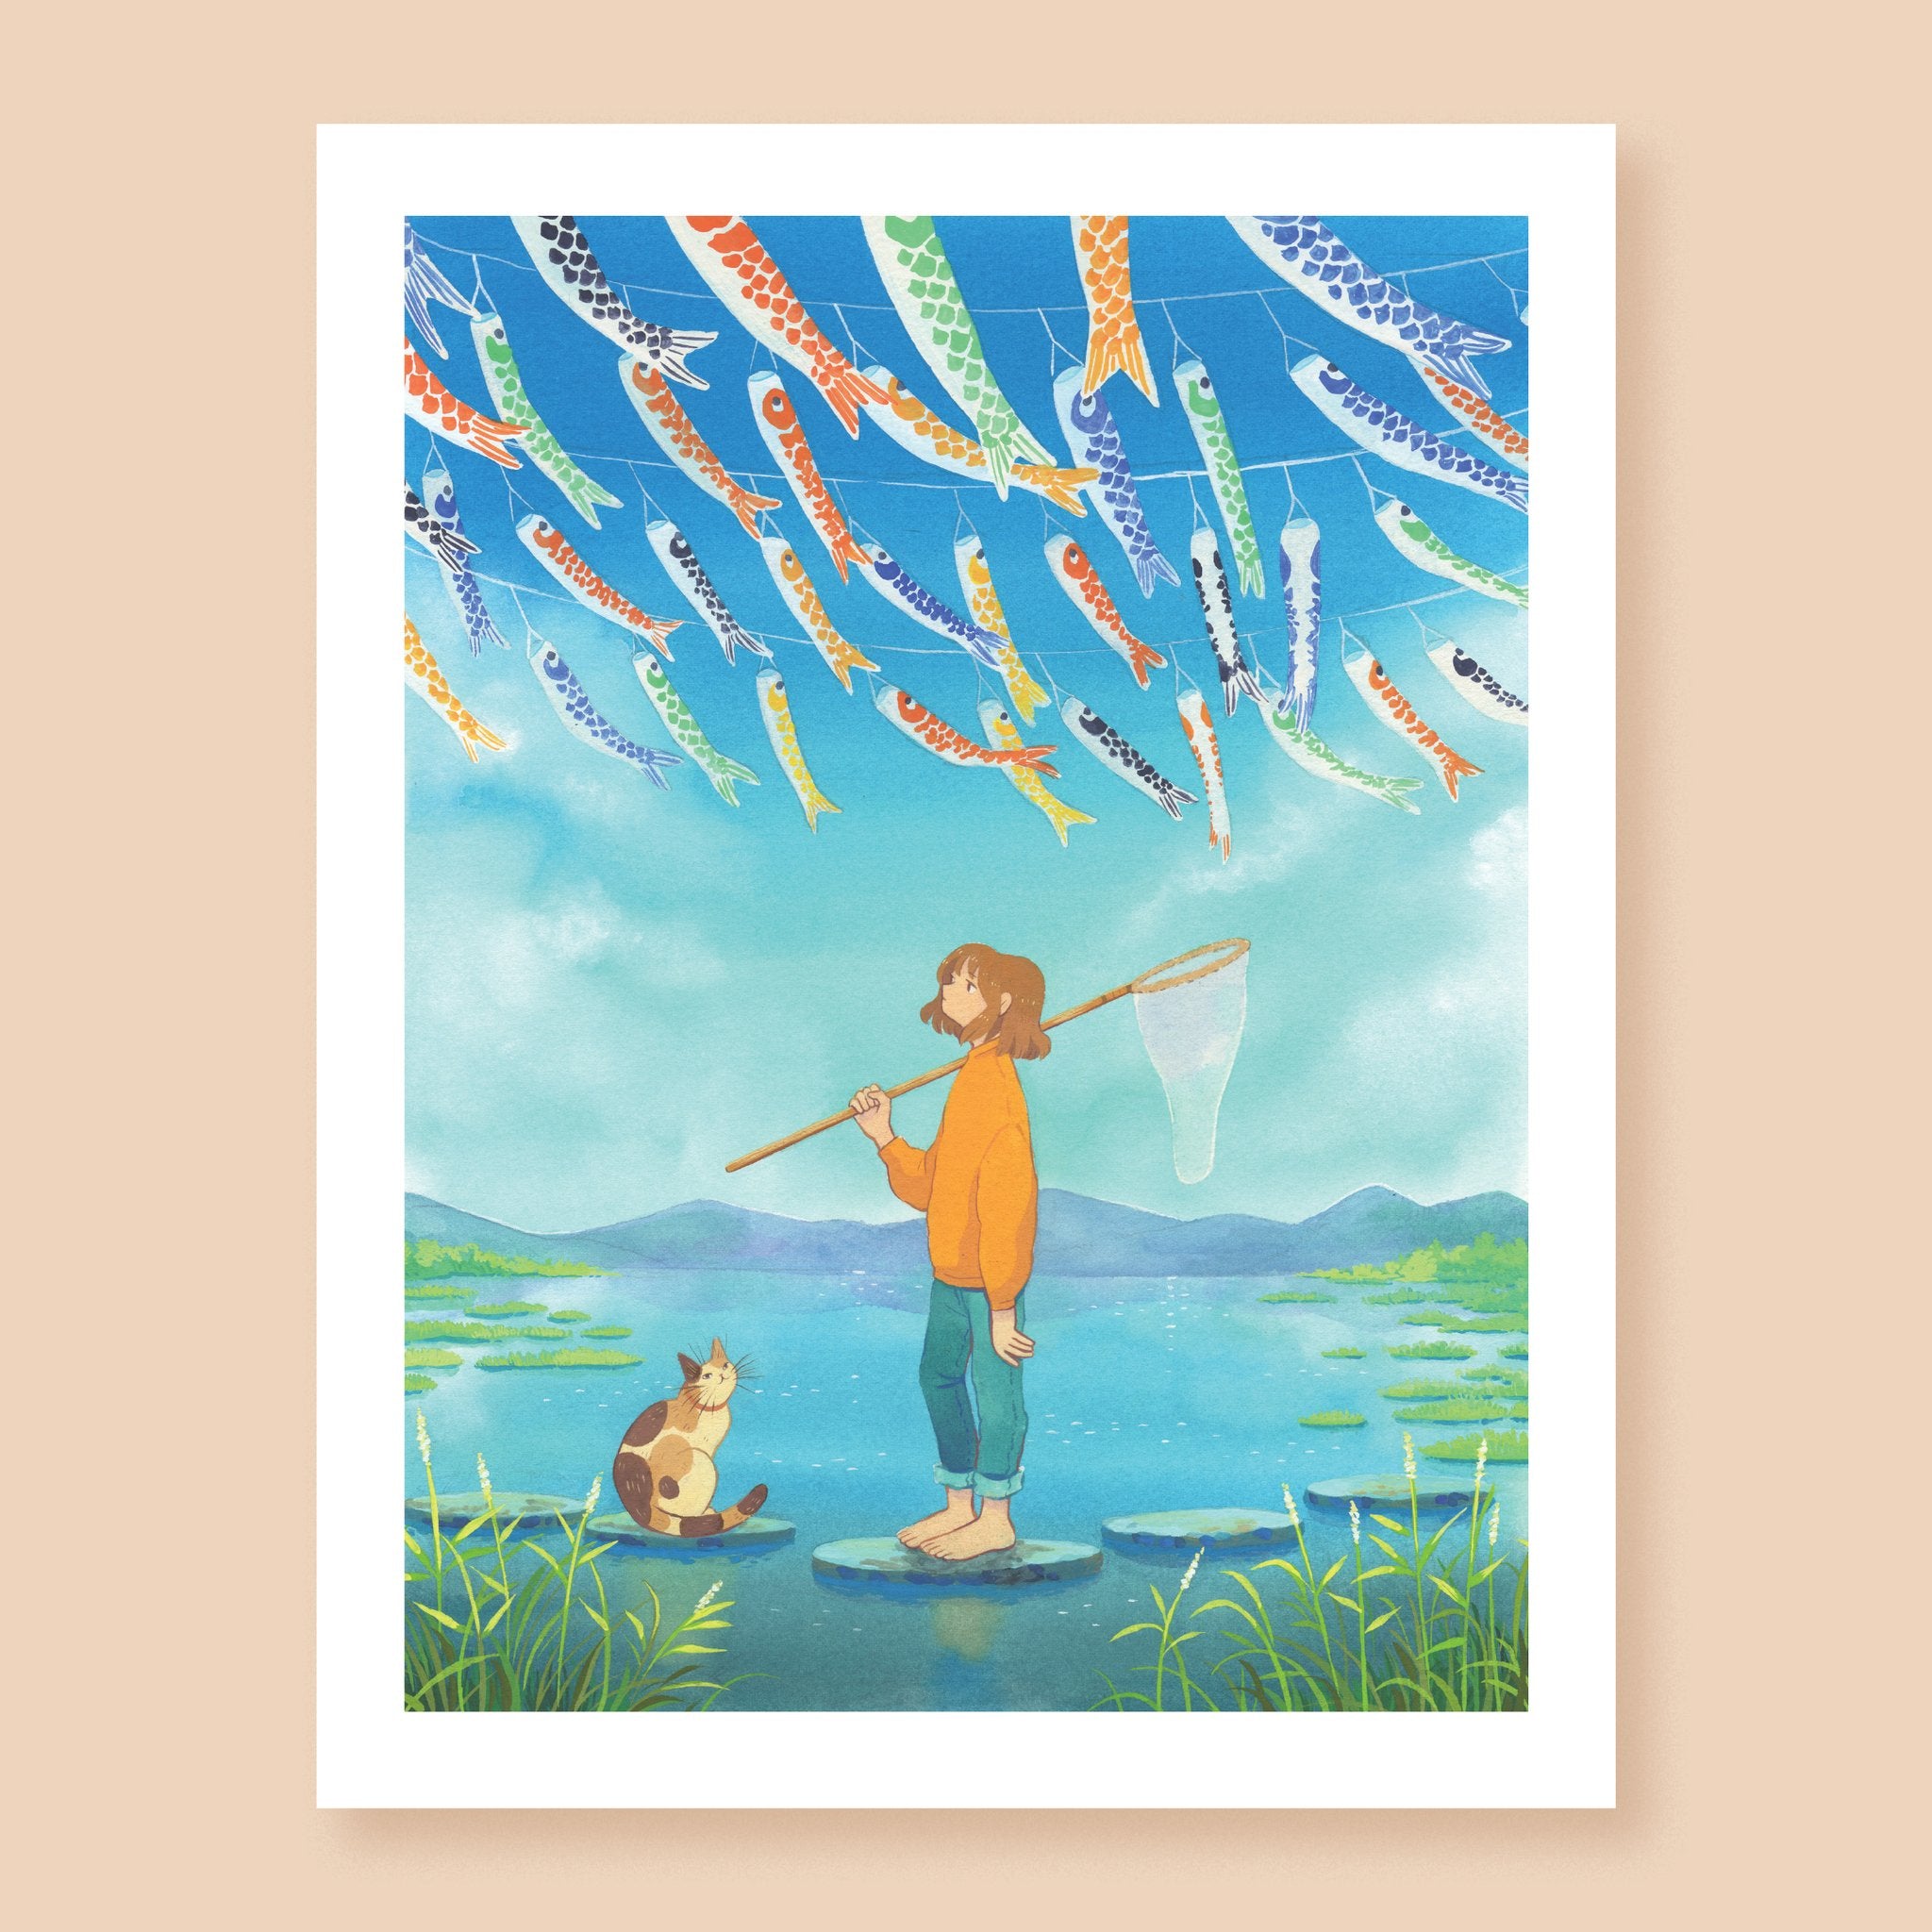 Print of a poster color artwork depicting a character holding a bug-catching net, standing on a stepping stone path across a calm body of water. There is a brown cat on a stone next to them, and above them on the blue sky there are koinobori banners flowing in the wind. 